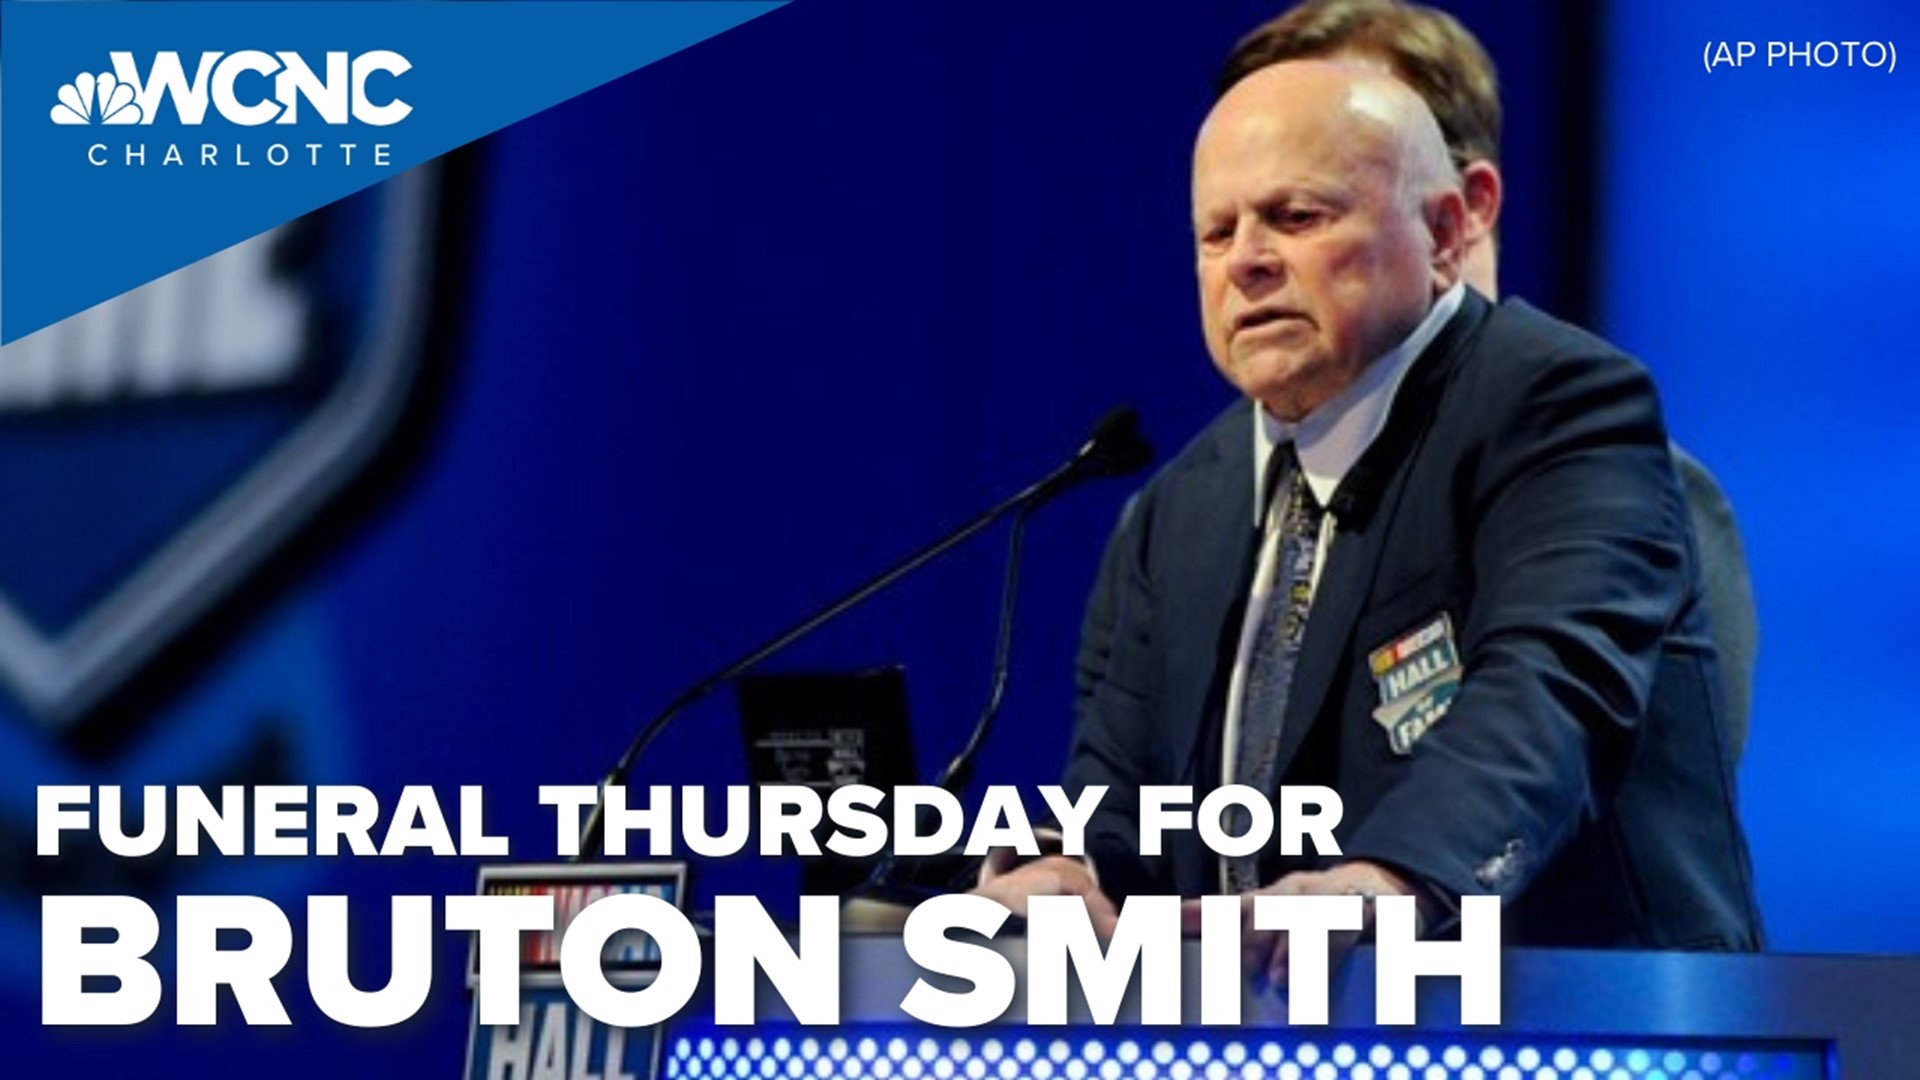 Tomorrow the NASCAR community will come together to remember the life of Bruton Smith.